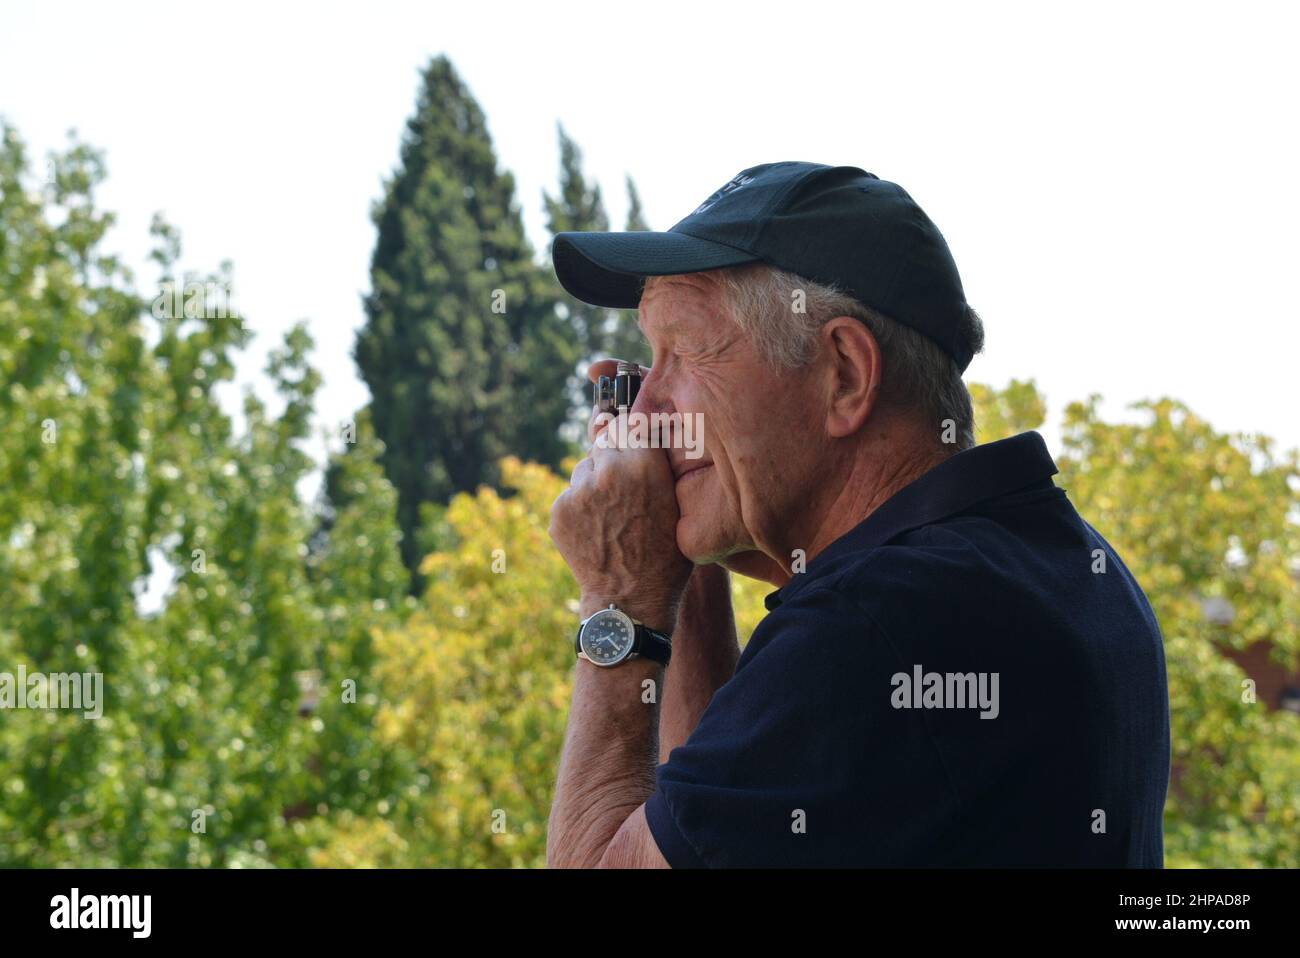 Elderly male photographer using an eye-level viewfinder miniature film camera. Blue shirt with blue cap against a soft background of green trees. Stock Photo